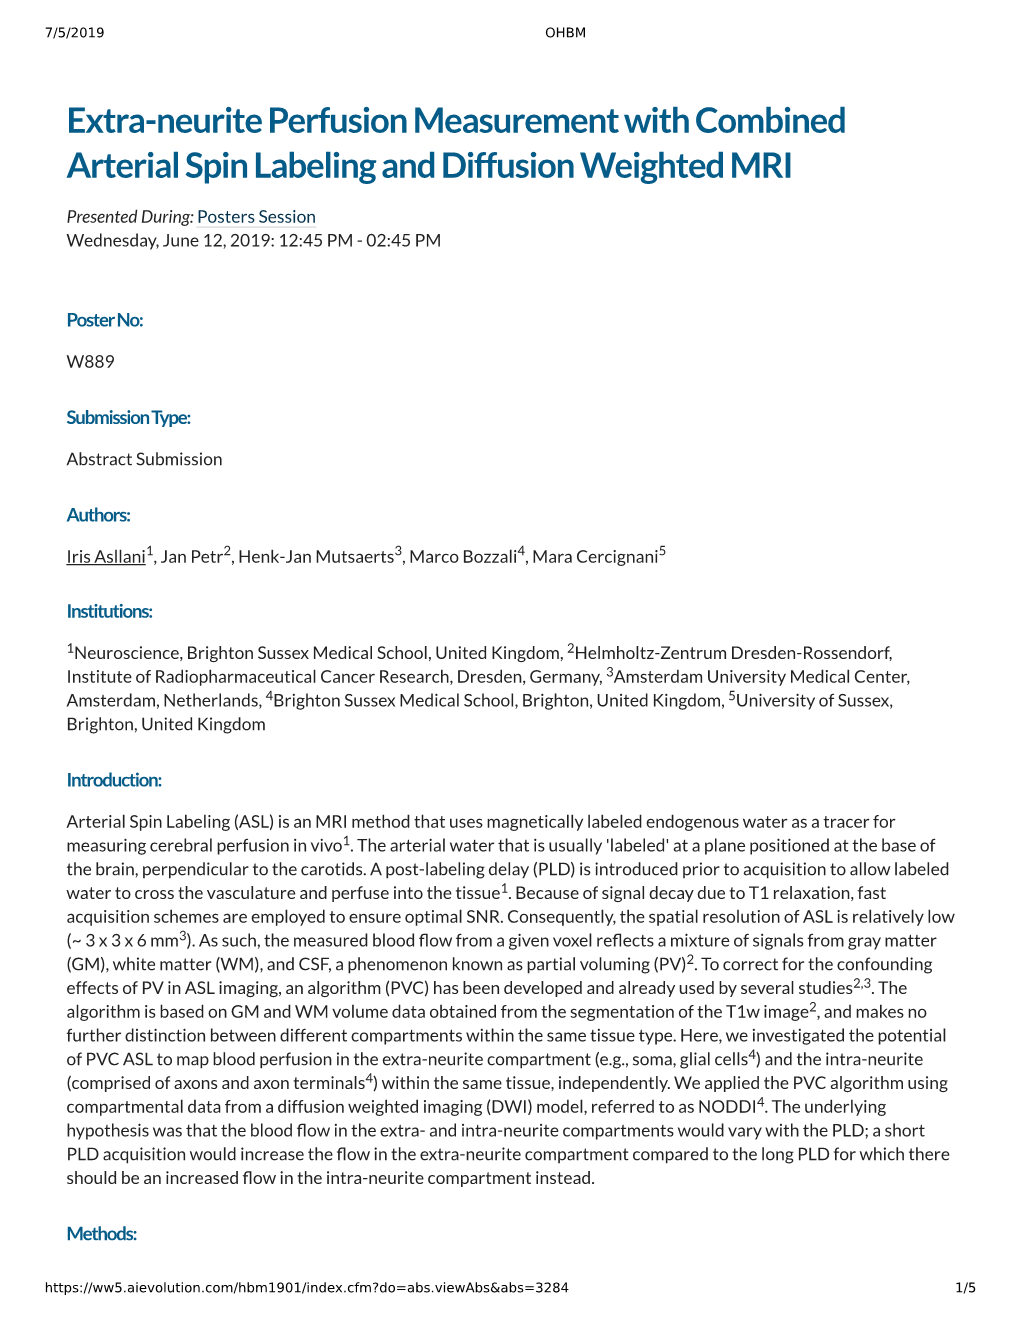 Extra-Neurite Perfusion Measurement with Combined Arterial Spin Labeling and Diffusion Weighted MRI